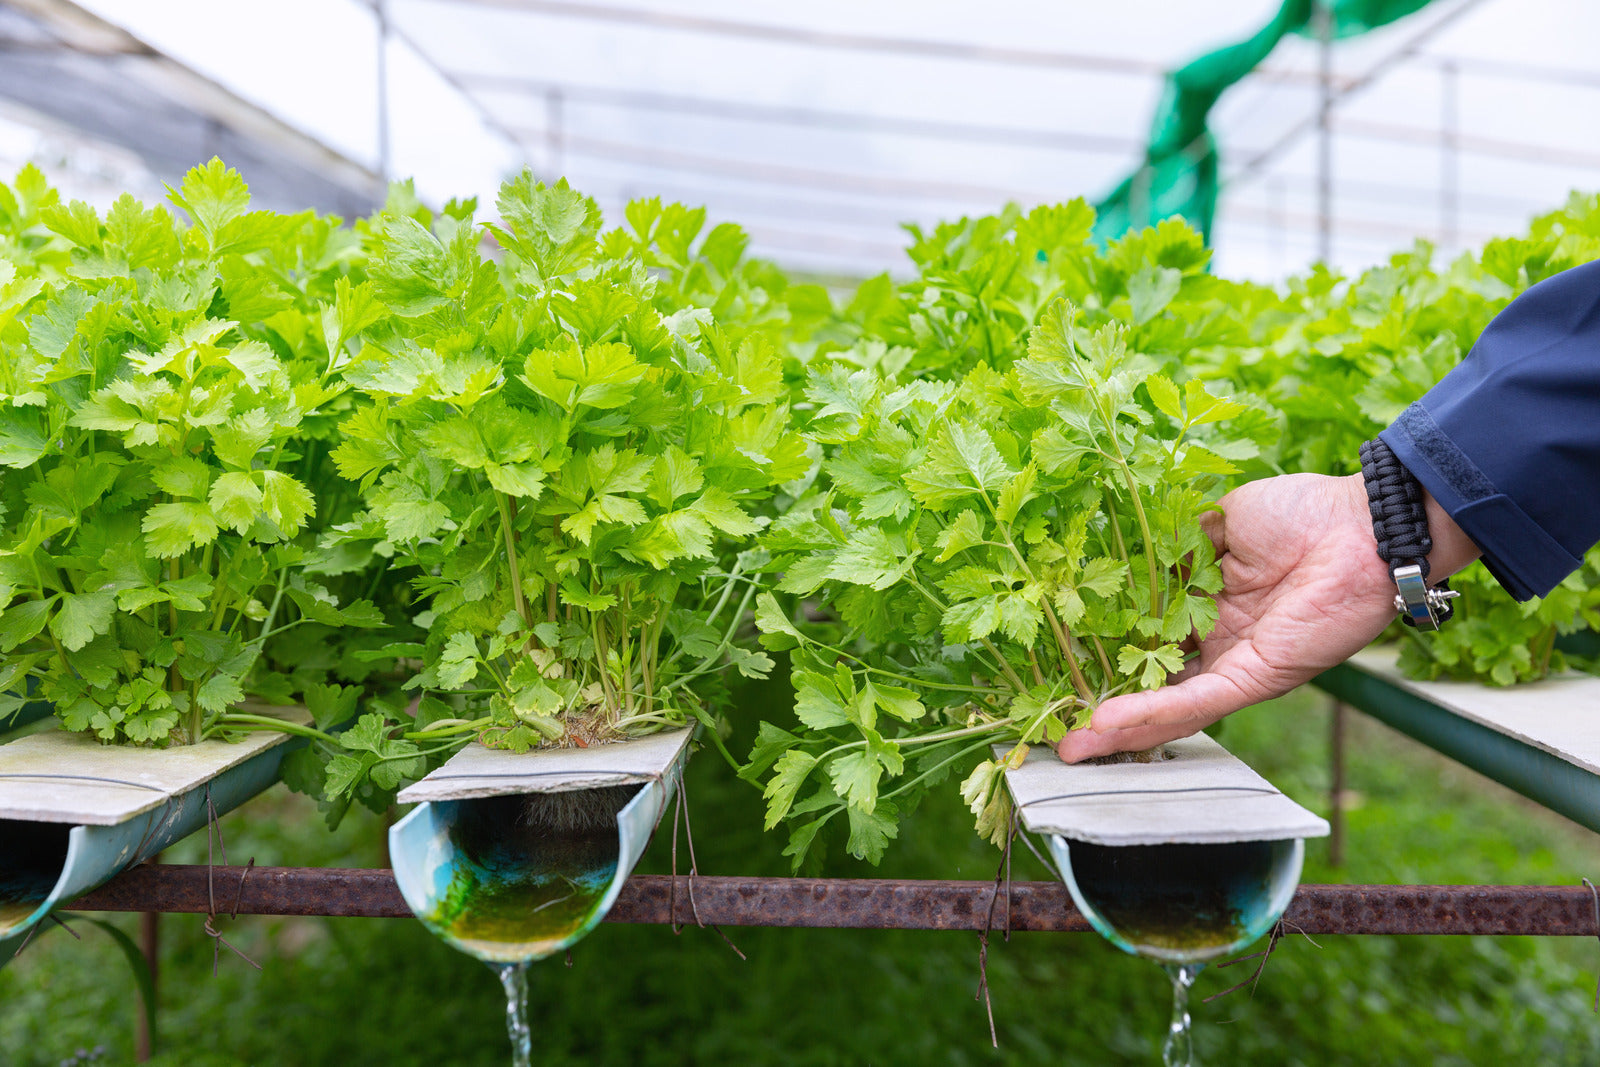 Using Aquaponics for a Self-Sustaining Survival Garden